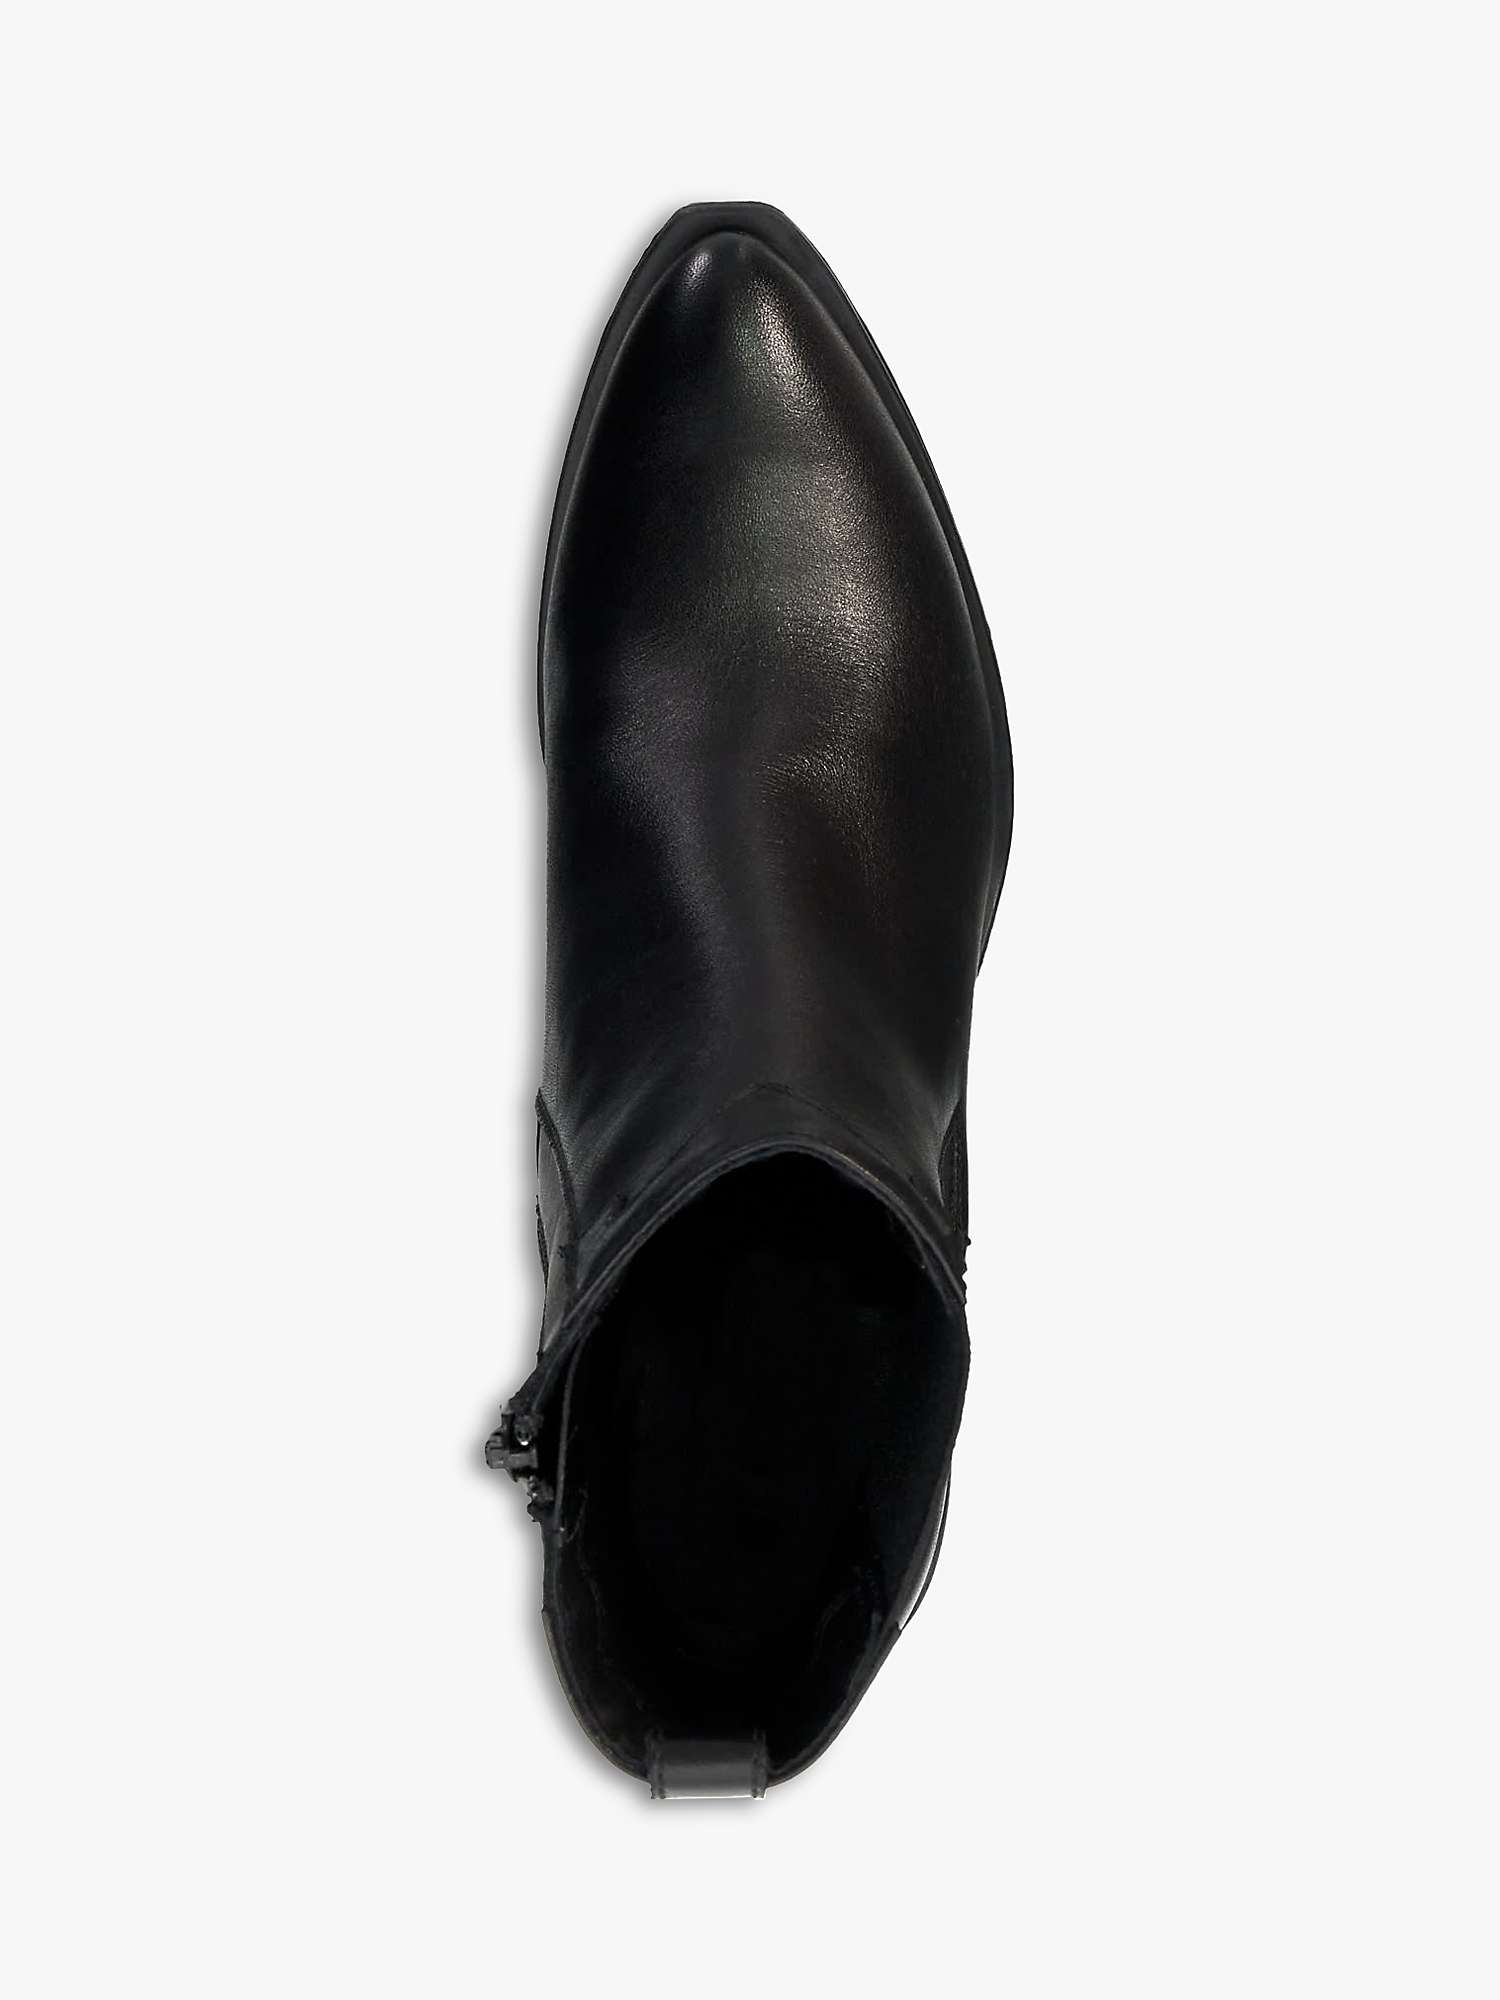 Buy Dune Patoka Leather Western Boots, Black Online at johnlewis.com